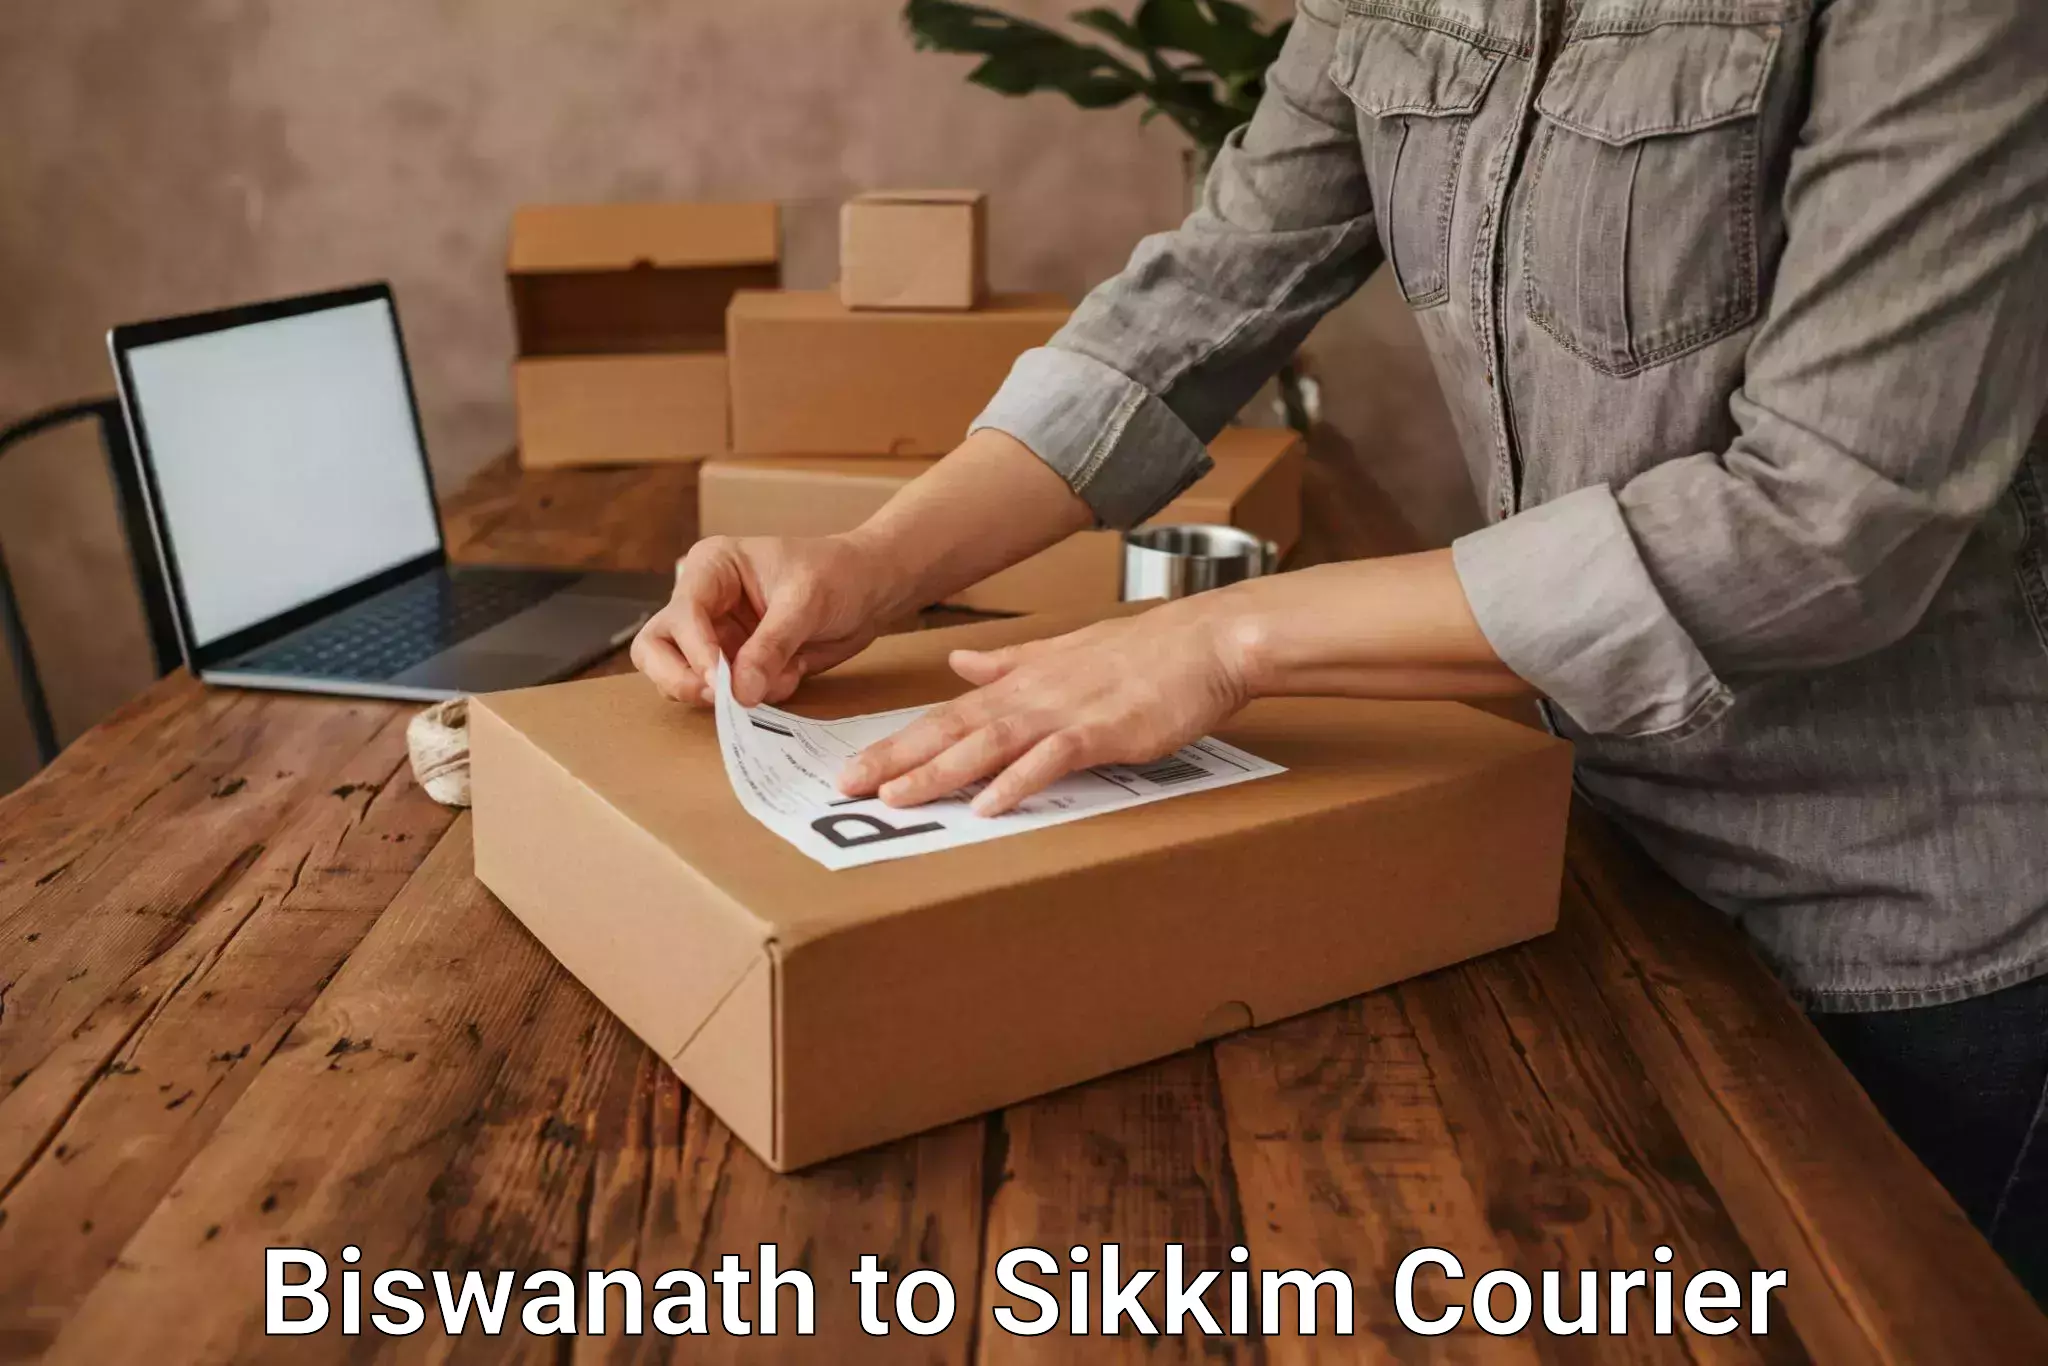 Efficient order fulfillment Biswanath to Pelling